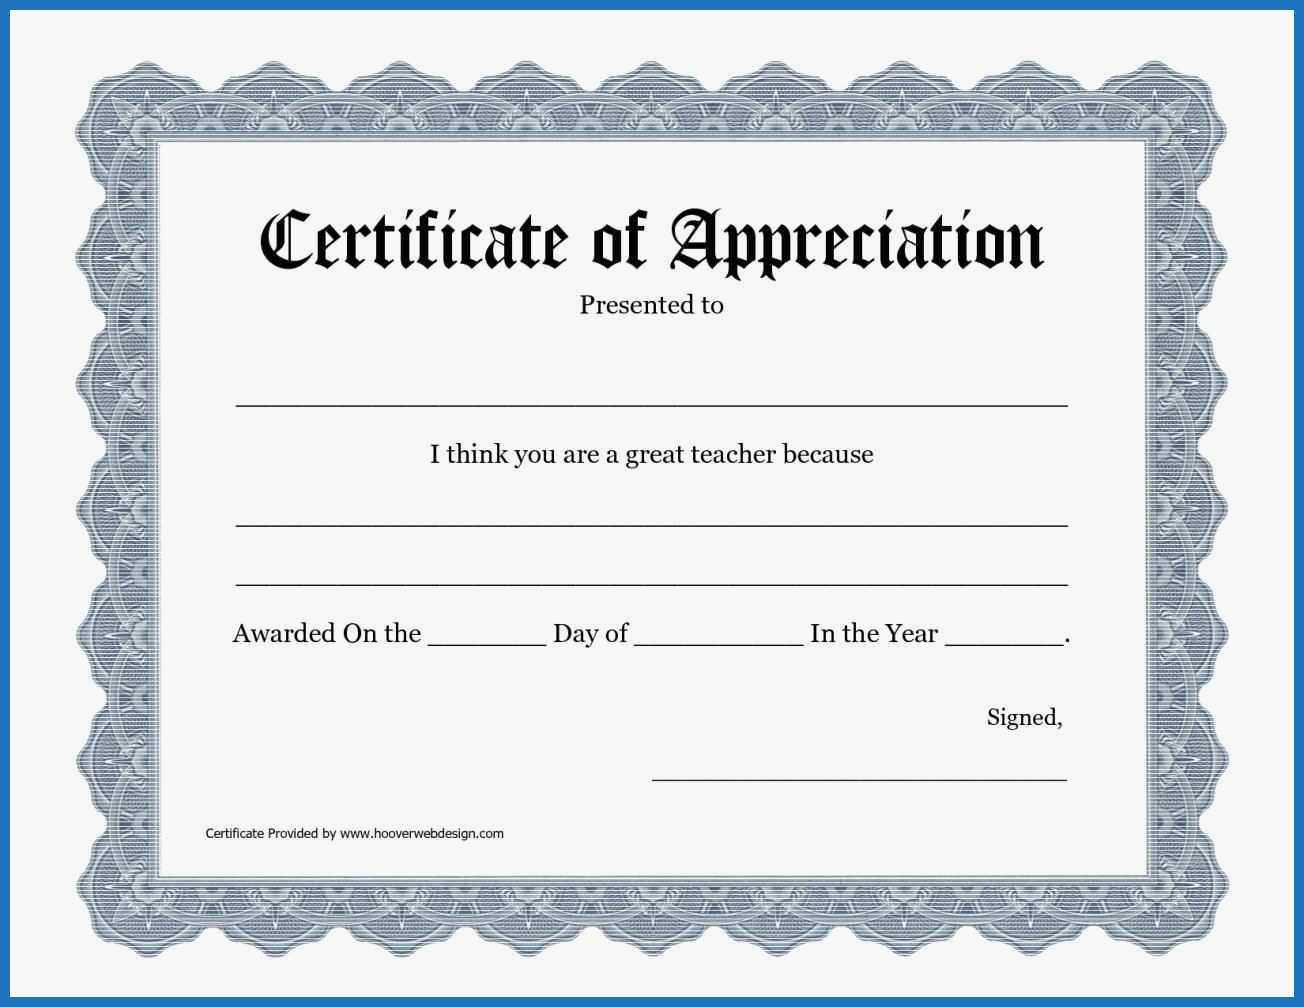 014 Recognition Certificate Templatee Ideas Of Appreciation Pertaining To Printable Certificate Of Recognition Templates Free